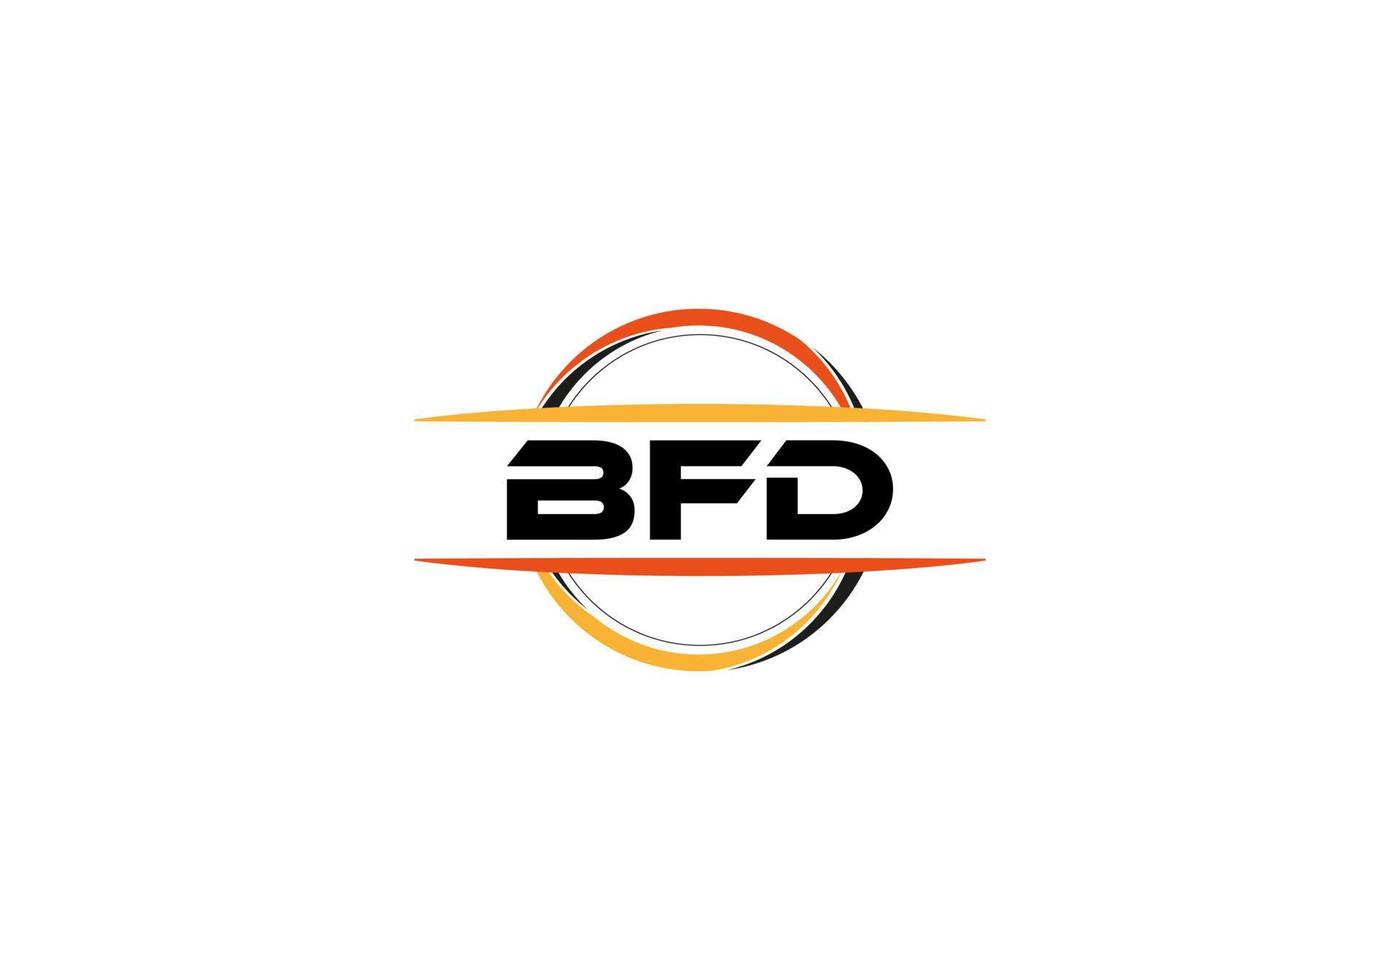 BFD letter royalty ellipse shape logo. BFD brush art logo. BFD logo for a company, business, and commercial use. vector